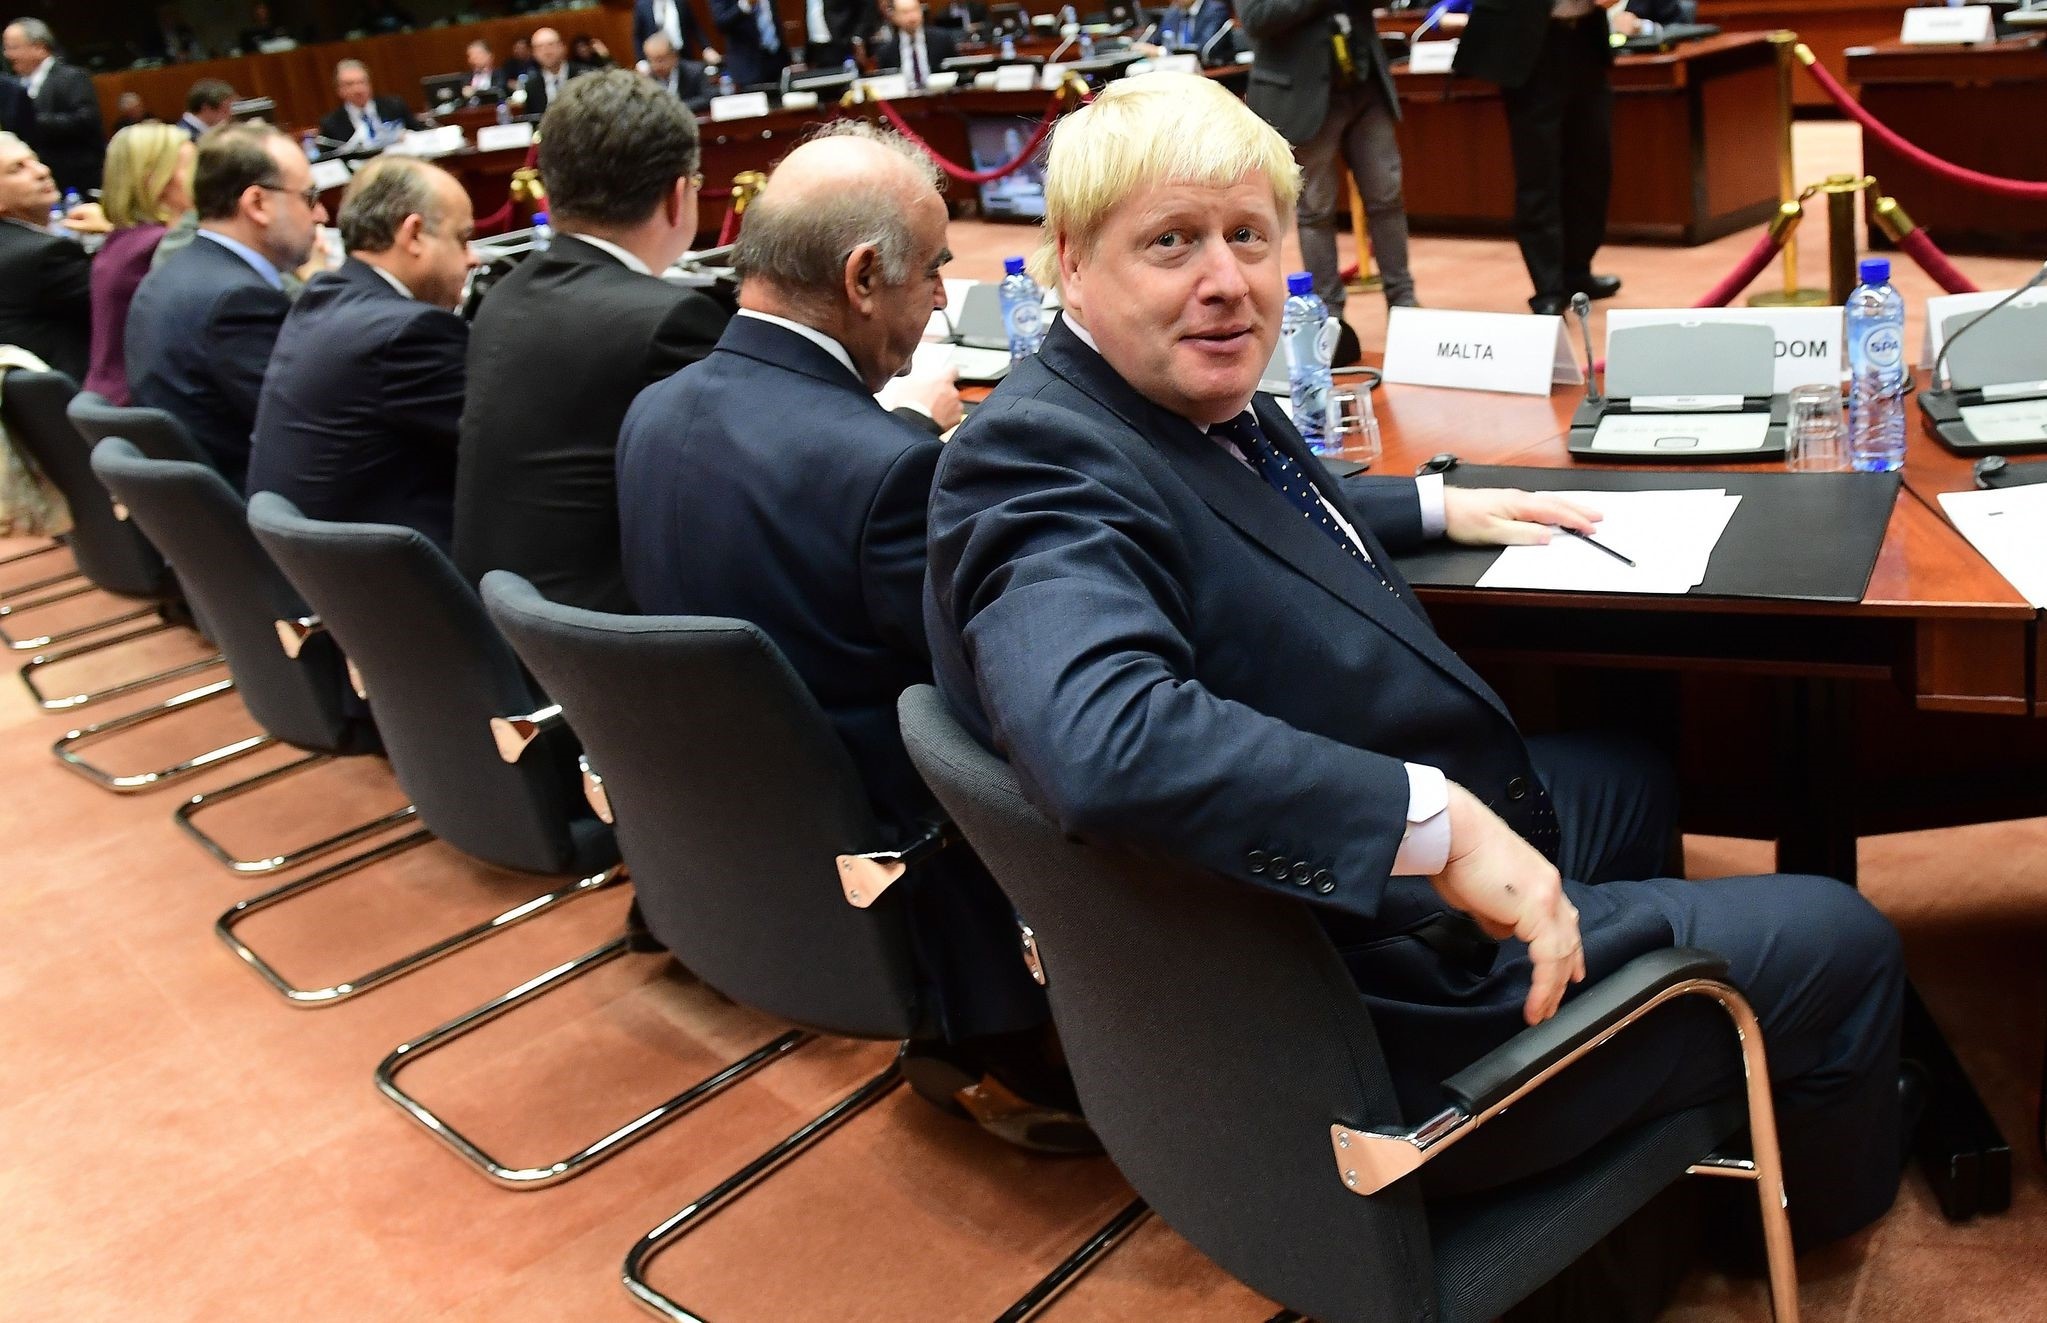 British Foreign Secretary Boris Johnson attends an EU foreign affairs council at the European Council, in Brussels on November 14, 2016. (AFP PHOTO)